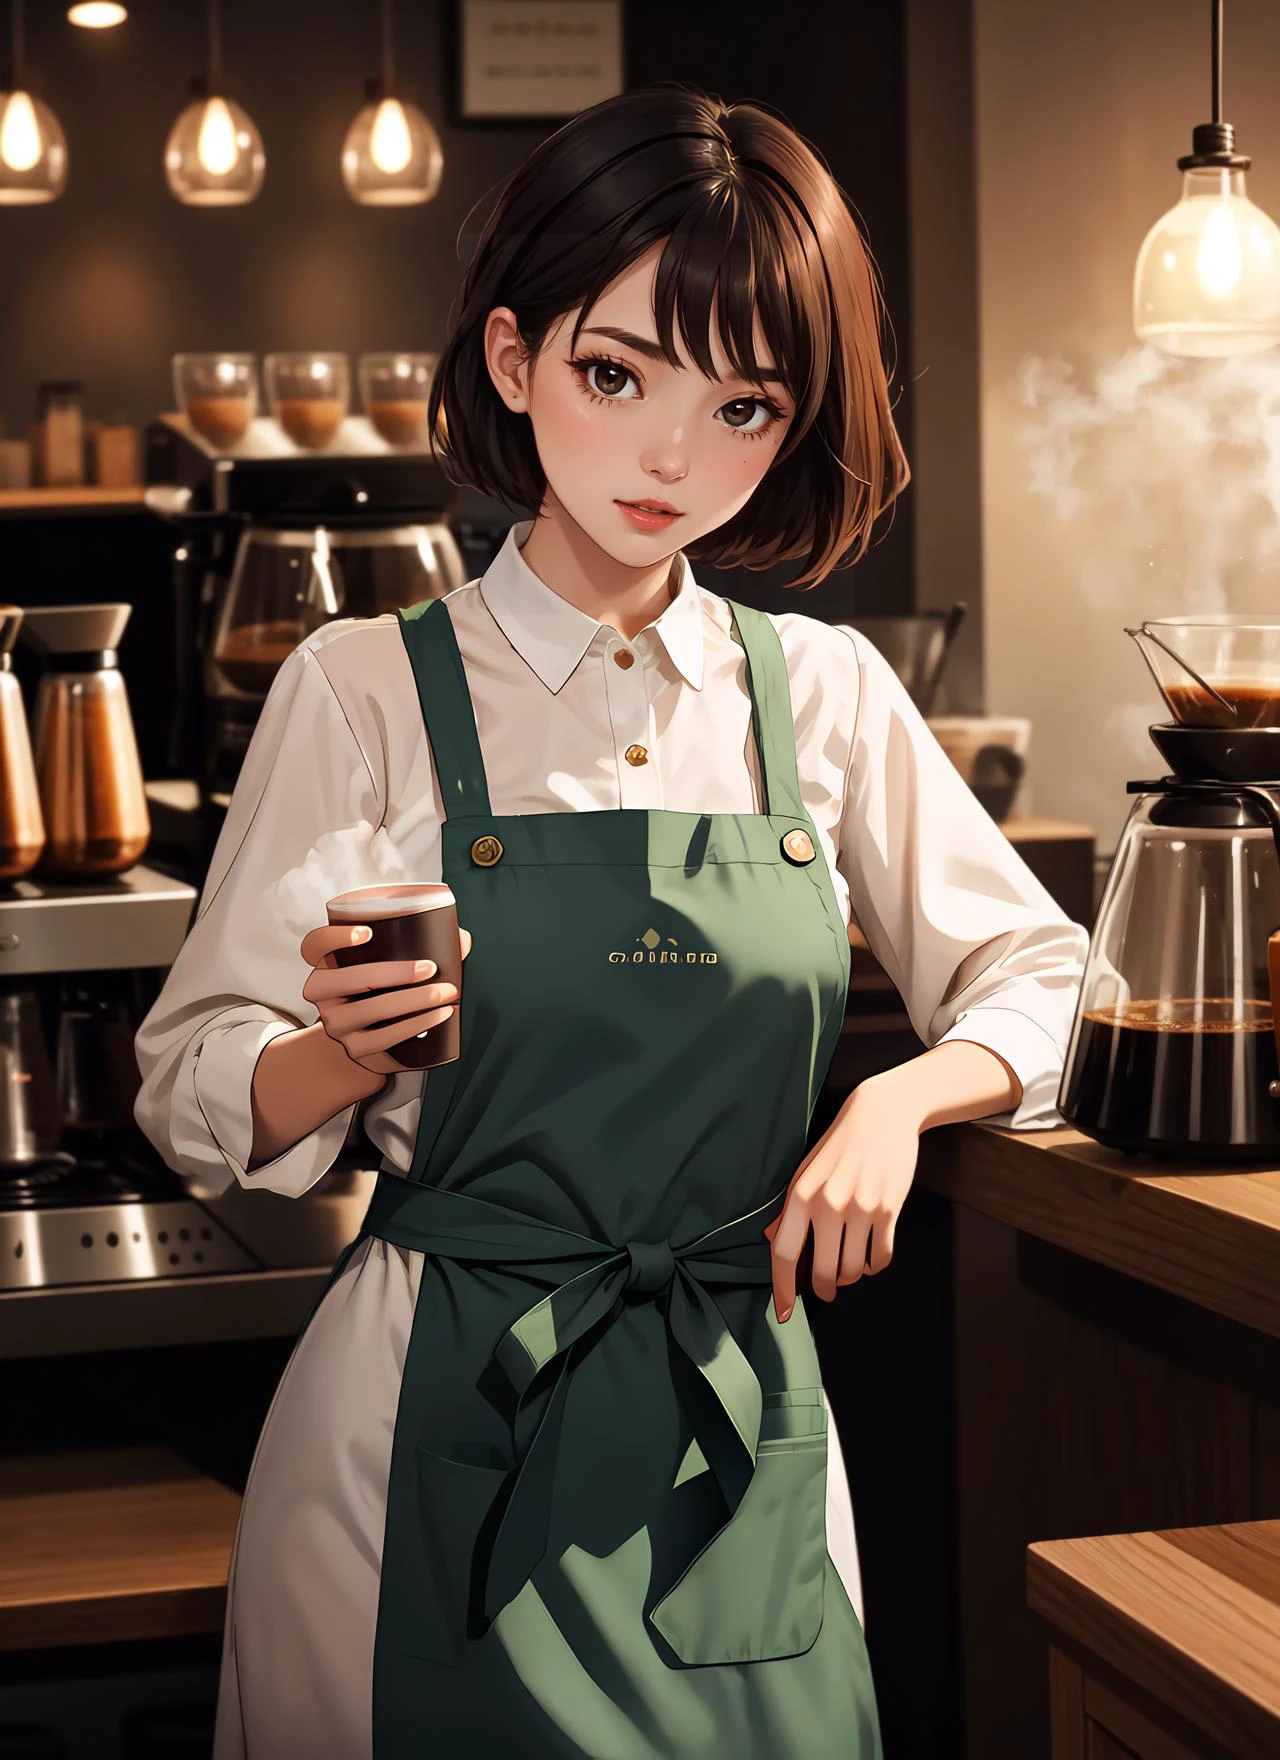 location: a cozy coffee shop with warm lighting and comfortable seating, BREAK, character: a petite and alluring barista with short hair, BREAK, clothing: nothing but a frilly apron that barely covers their modesty, emphasizing their delicate figure, BREAK, objects: a collection of high-end coffee equipment and freshly roasted beans, BREAK, atmosphere: steamy and provocative, BREAK, action: the naked barista confidently brewing up a storm of delicious coffee, with every move emphasizing their charming and  beauty, BREAK, quality: a tantalizing and unforgettable experience for all involved